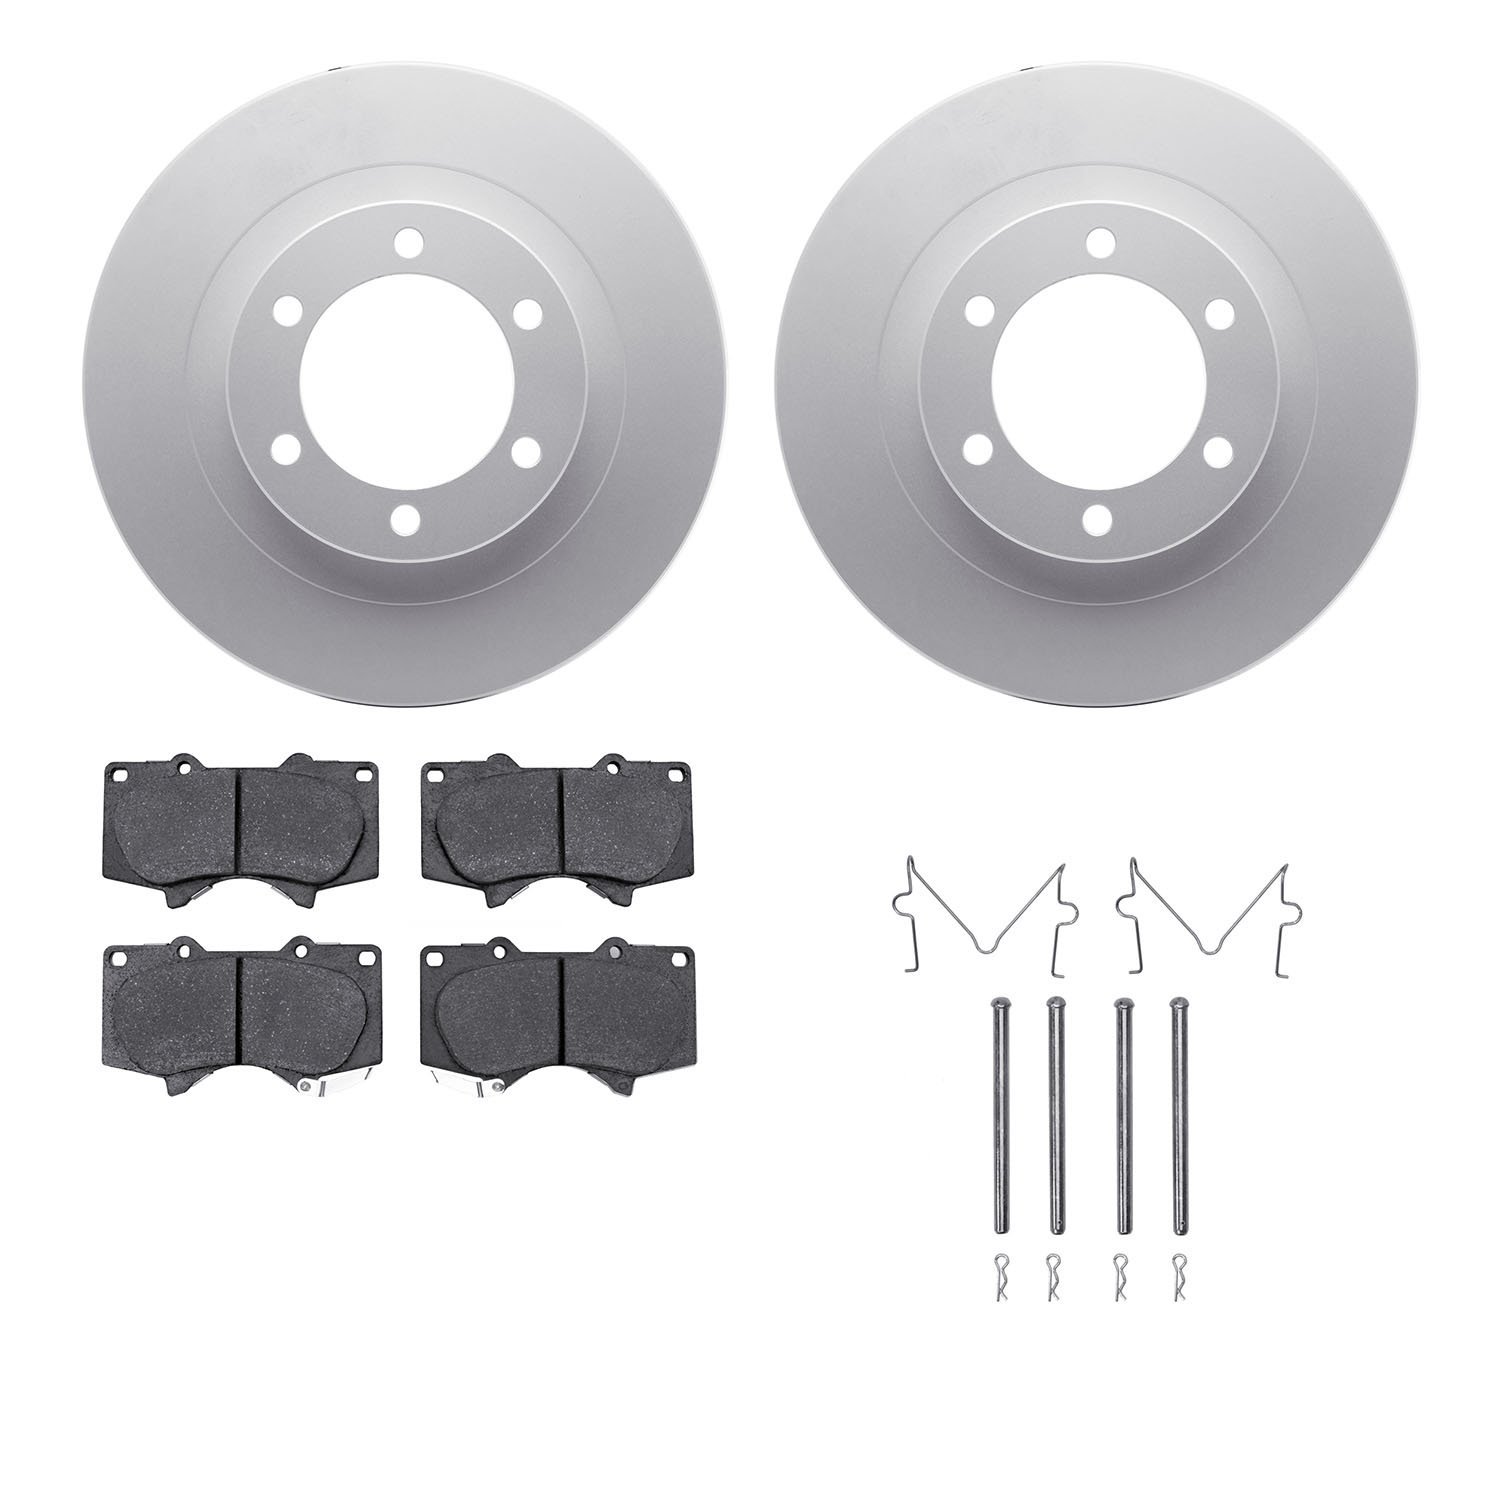 4412-76009 Geospec Brake Rotors with Ultimate-Duty Brake Pads & Hardware, 2003-2009 Lexus/Toyota/Scion, Position: Front